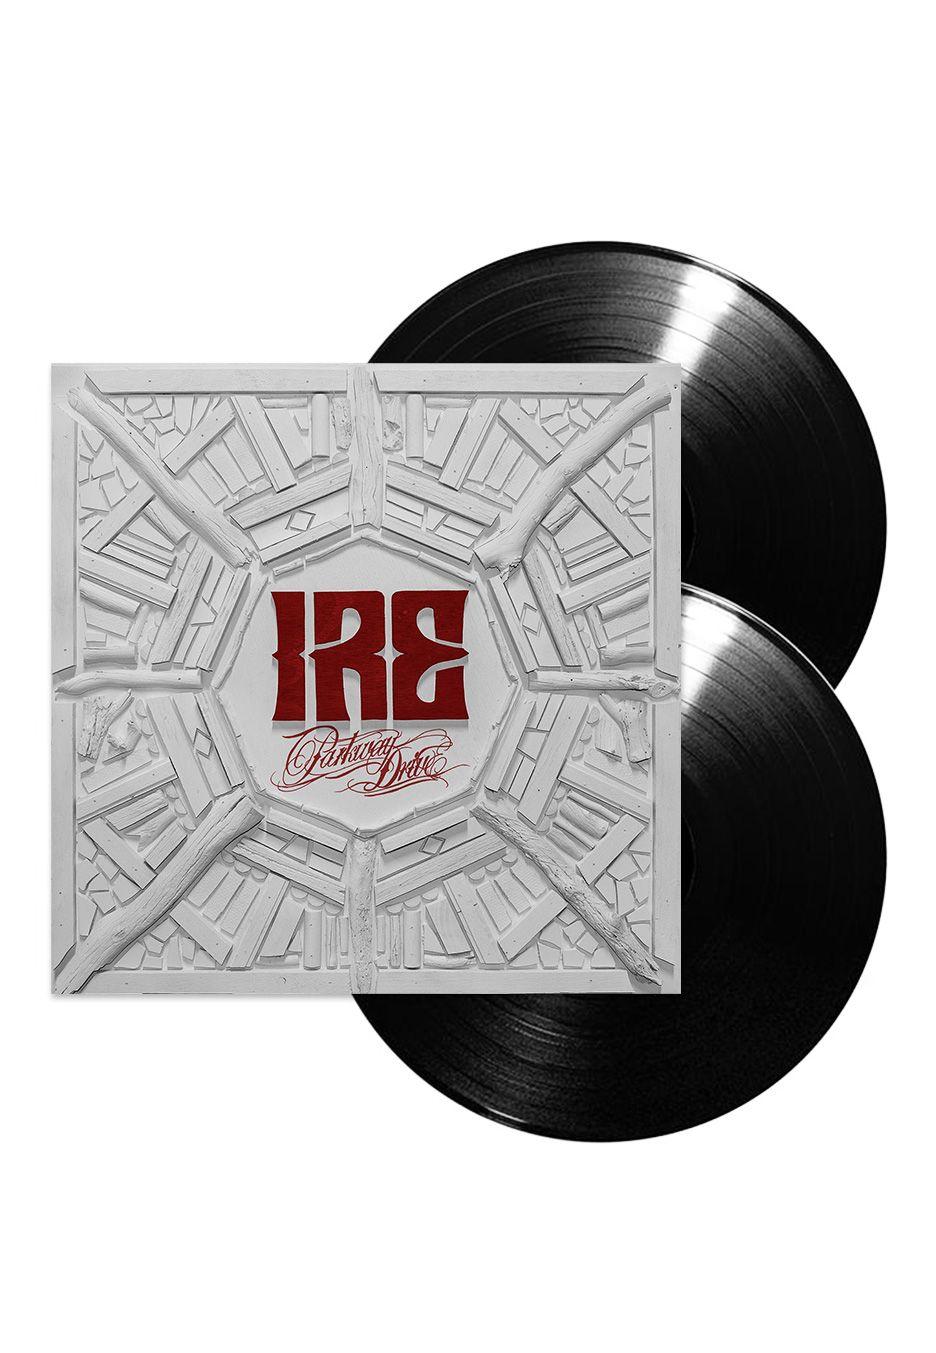 Parkway Drive Ire Logo - Parkway Drive - Ire - 2 LP - CDs, Vinyl and DVDs of your favourite ...